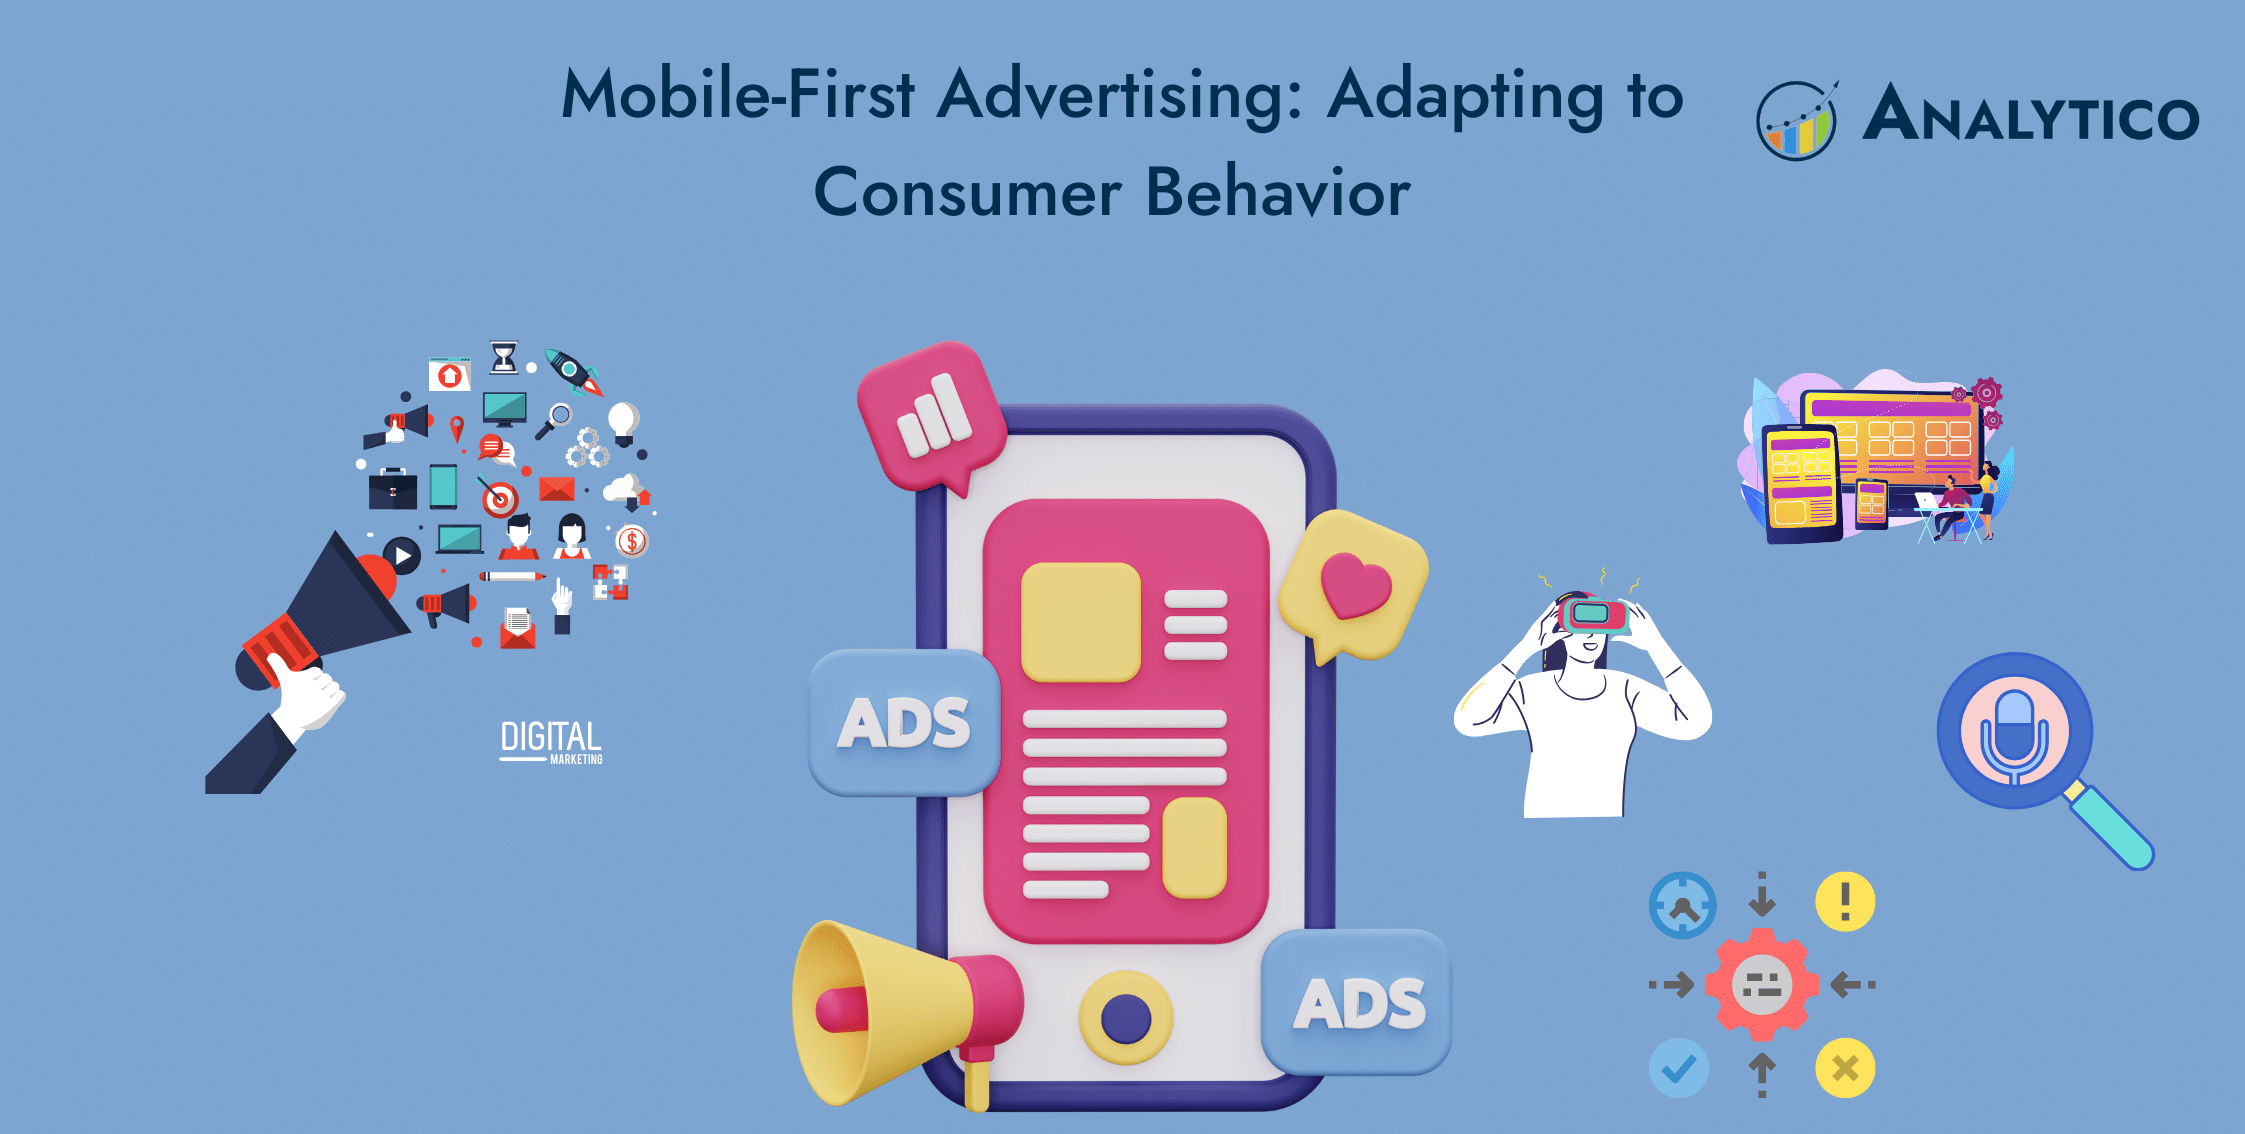 Mobile-First Advertising: Adapting to Consumer Behavior